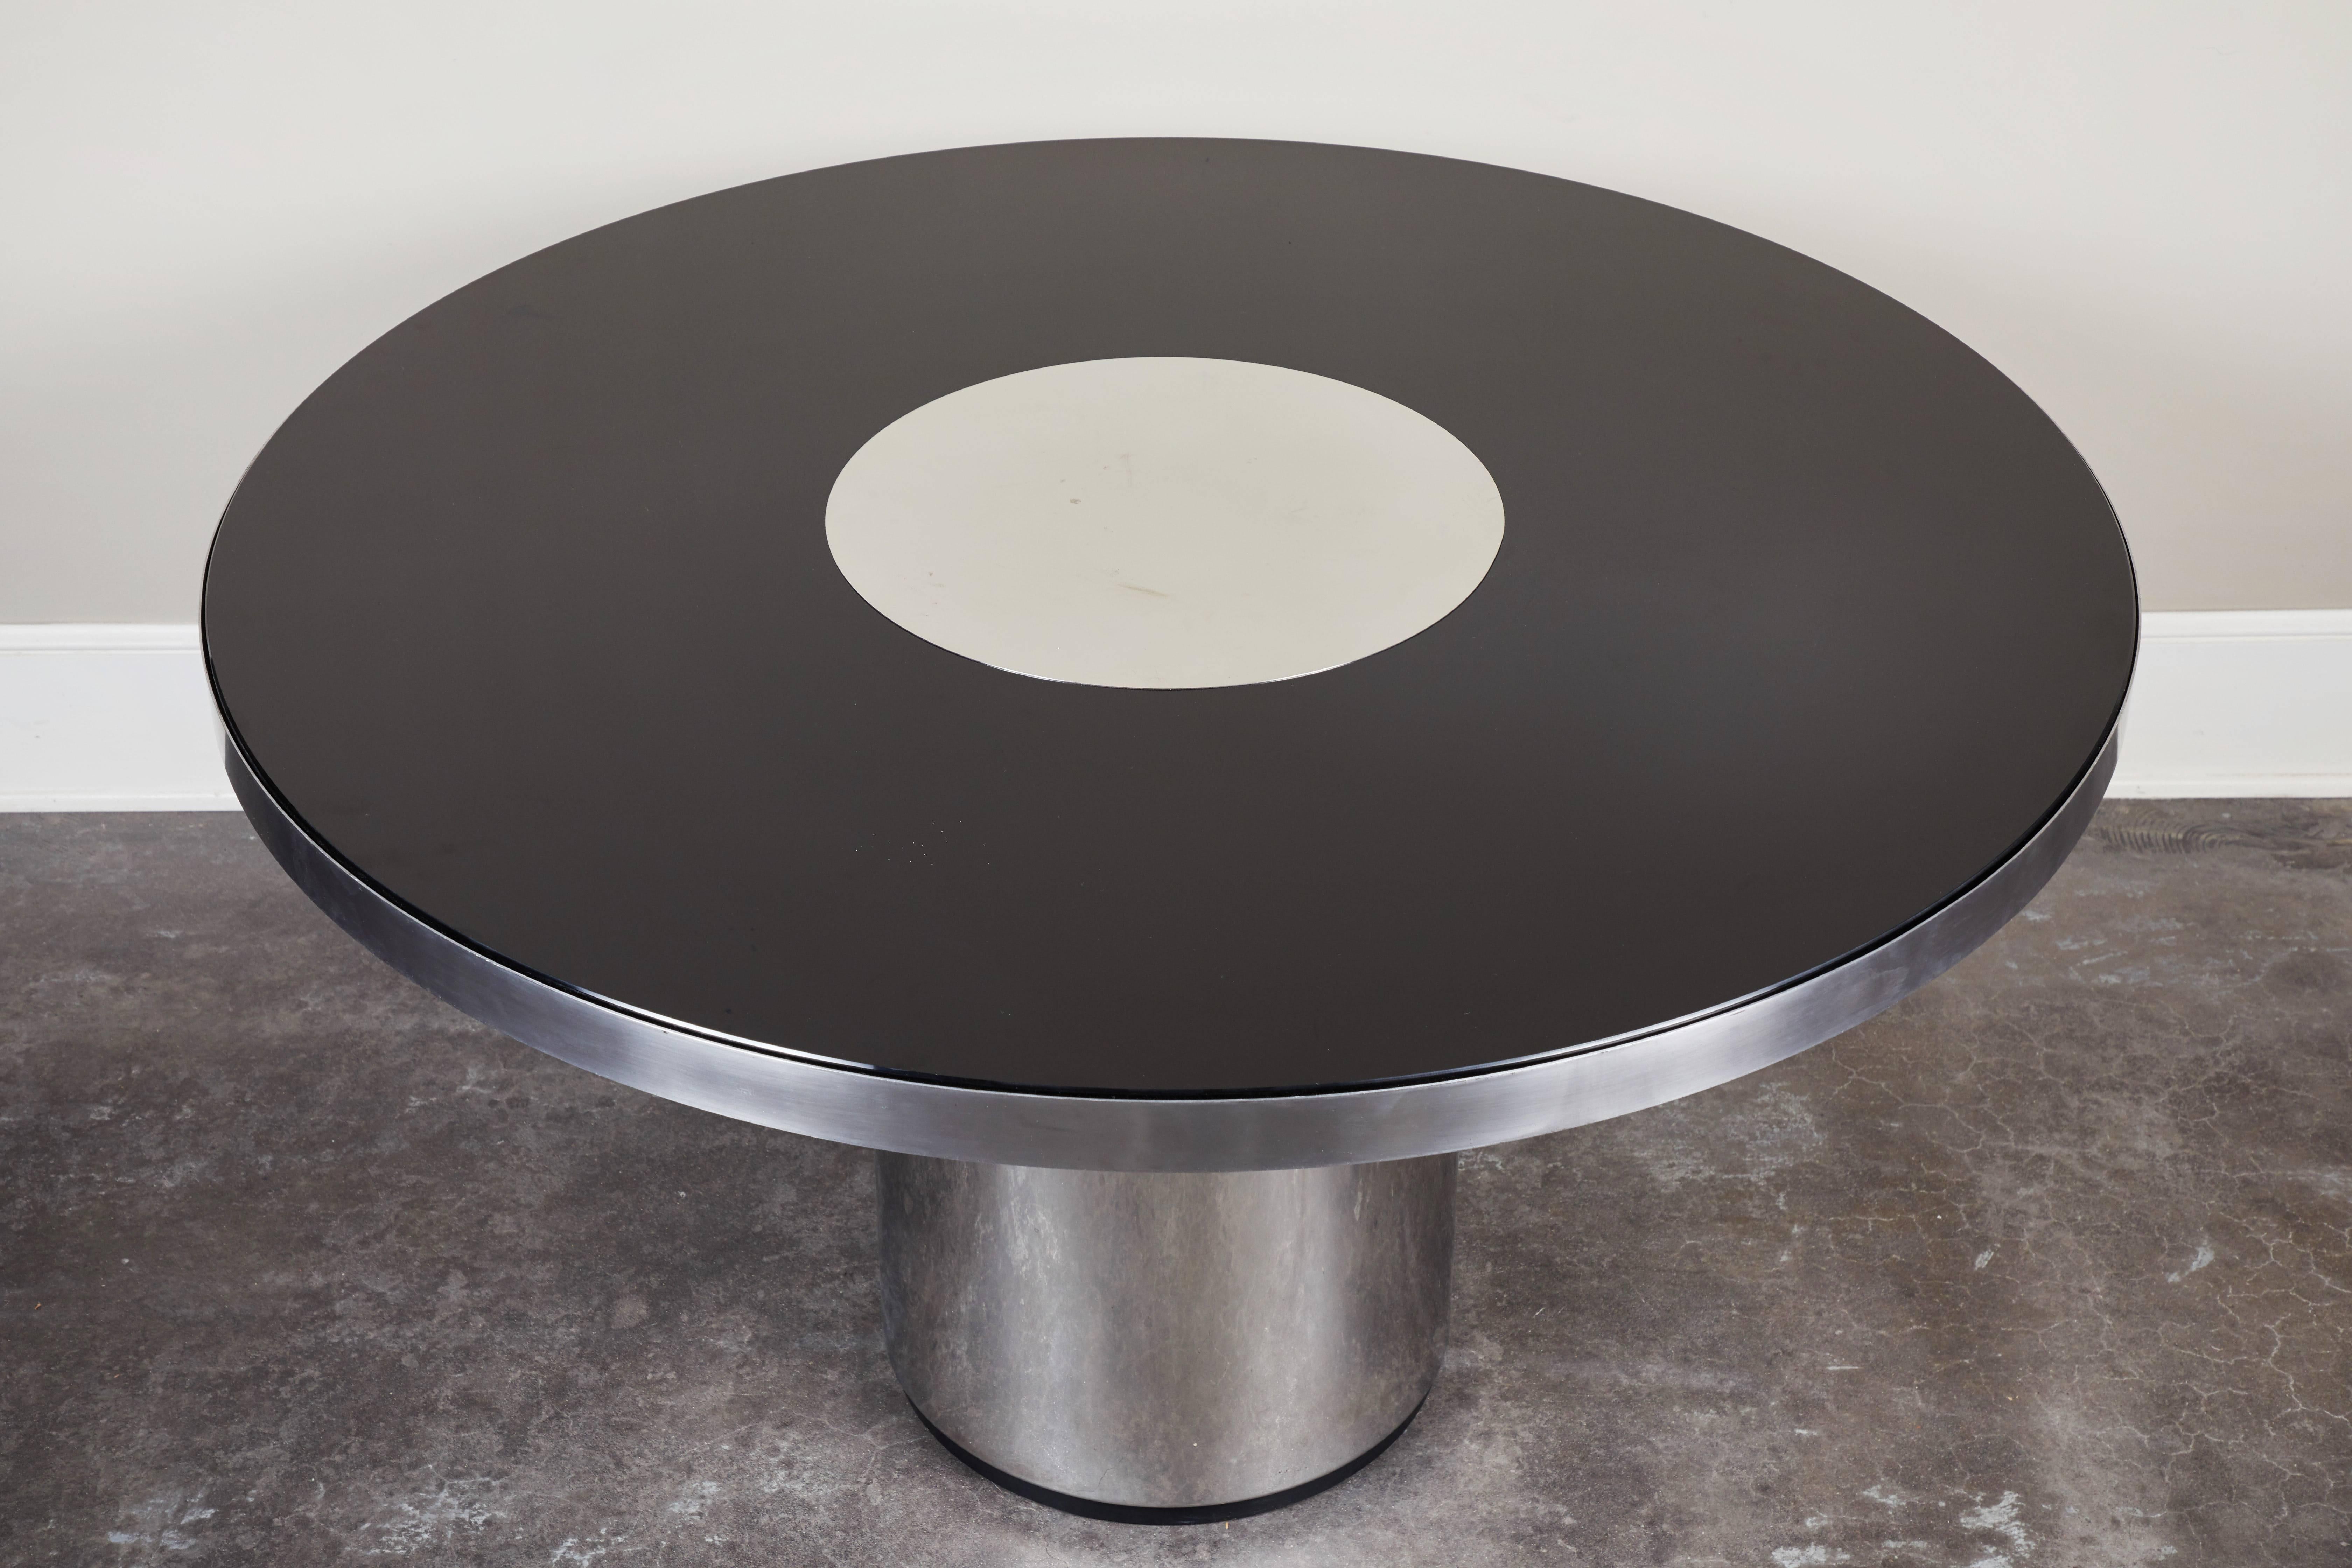 Brueton style round steel and glass table. Brueton's uncompromising attention to detail combine with the visual continuity of this design to create a simple yet unique table. Tops of different materials float over a seamless metal apron.  Similar